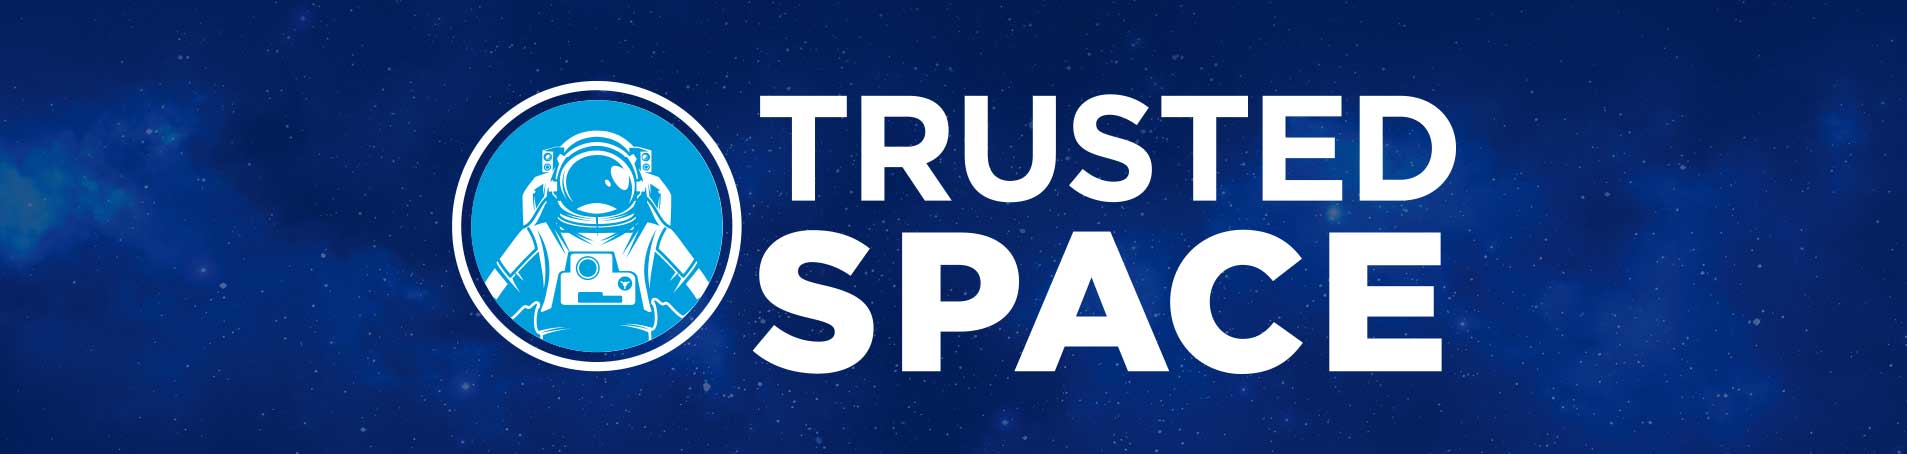 Trusted Space